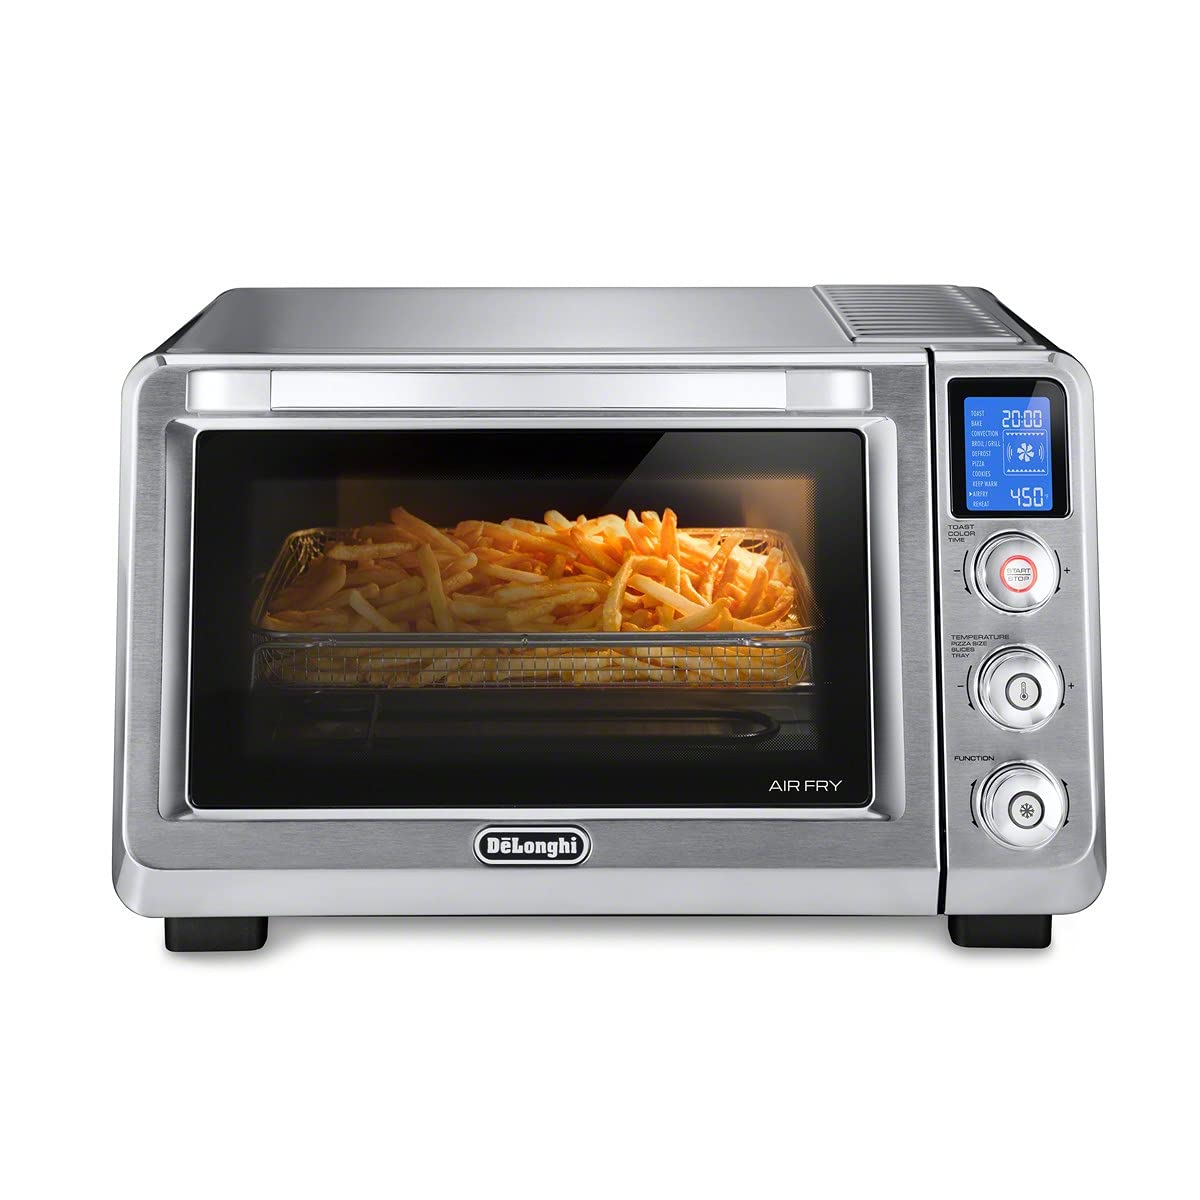 De'Longhi EO241264M 10-in-1 Digital AirFryer ,True Convection Toaster Oven with internal light, Grills, Broils, Bakes, Roasts, Reheats, preset for Cookie & Pizza, 1800-Watts, Stainless Steel, XL 24L